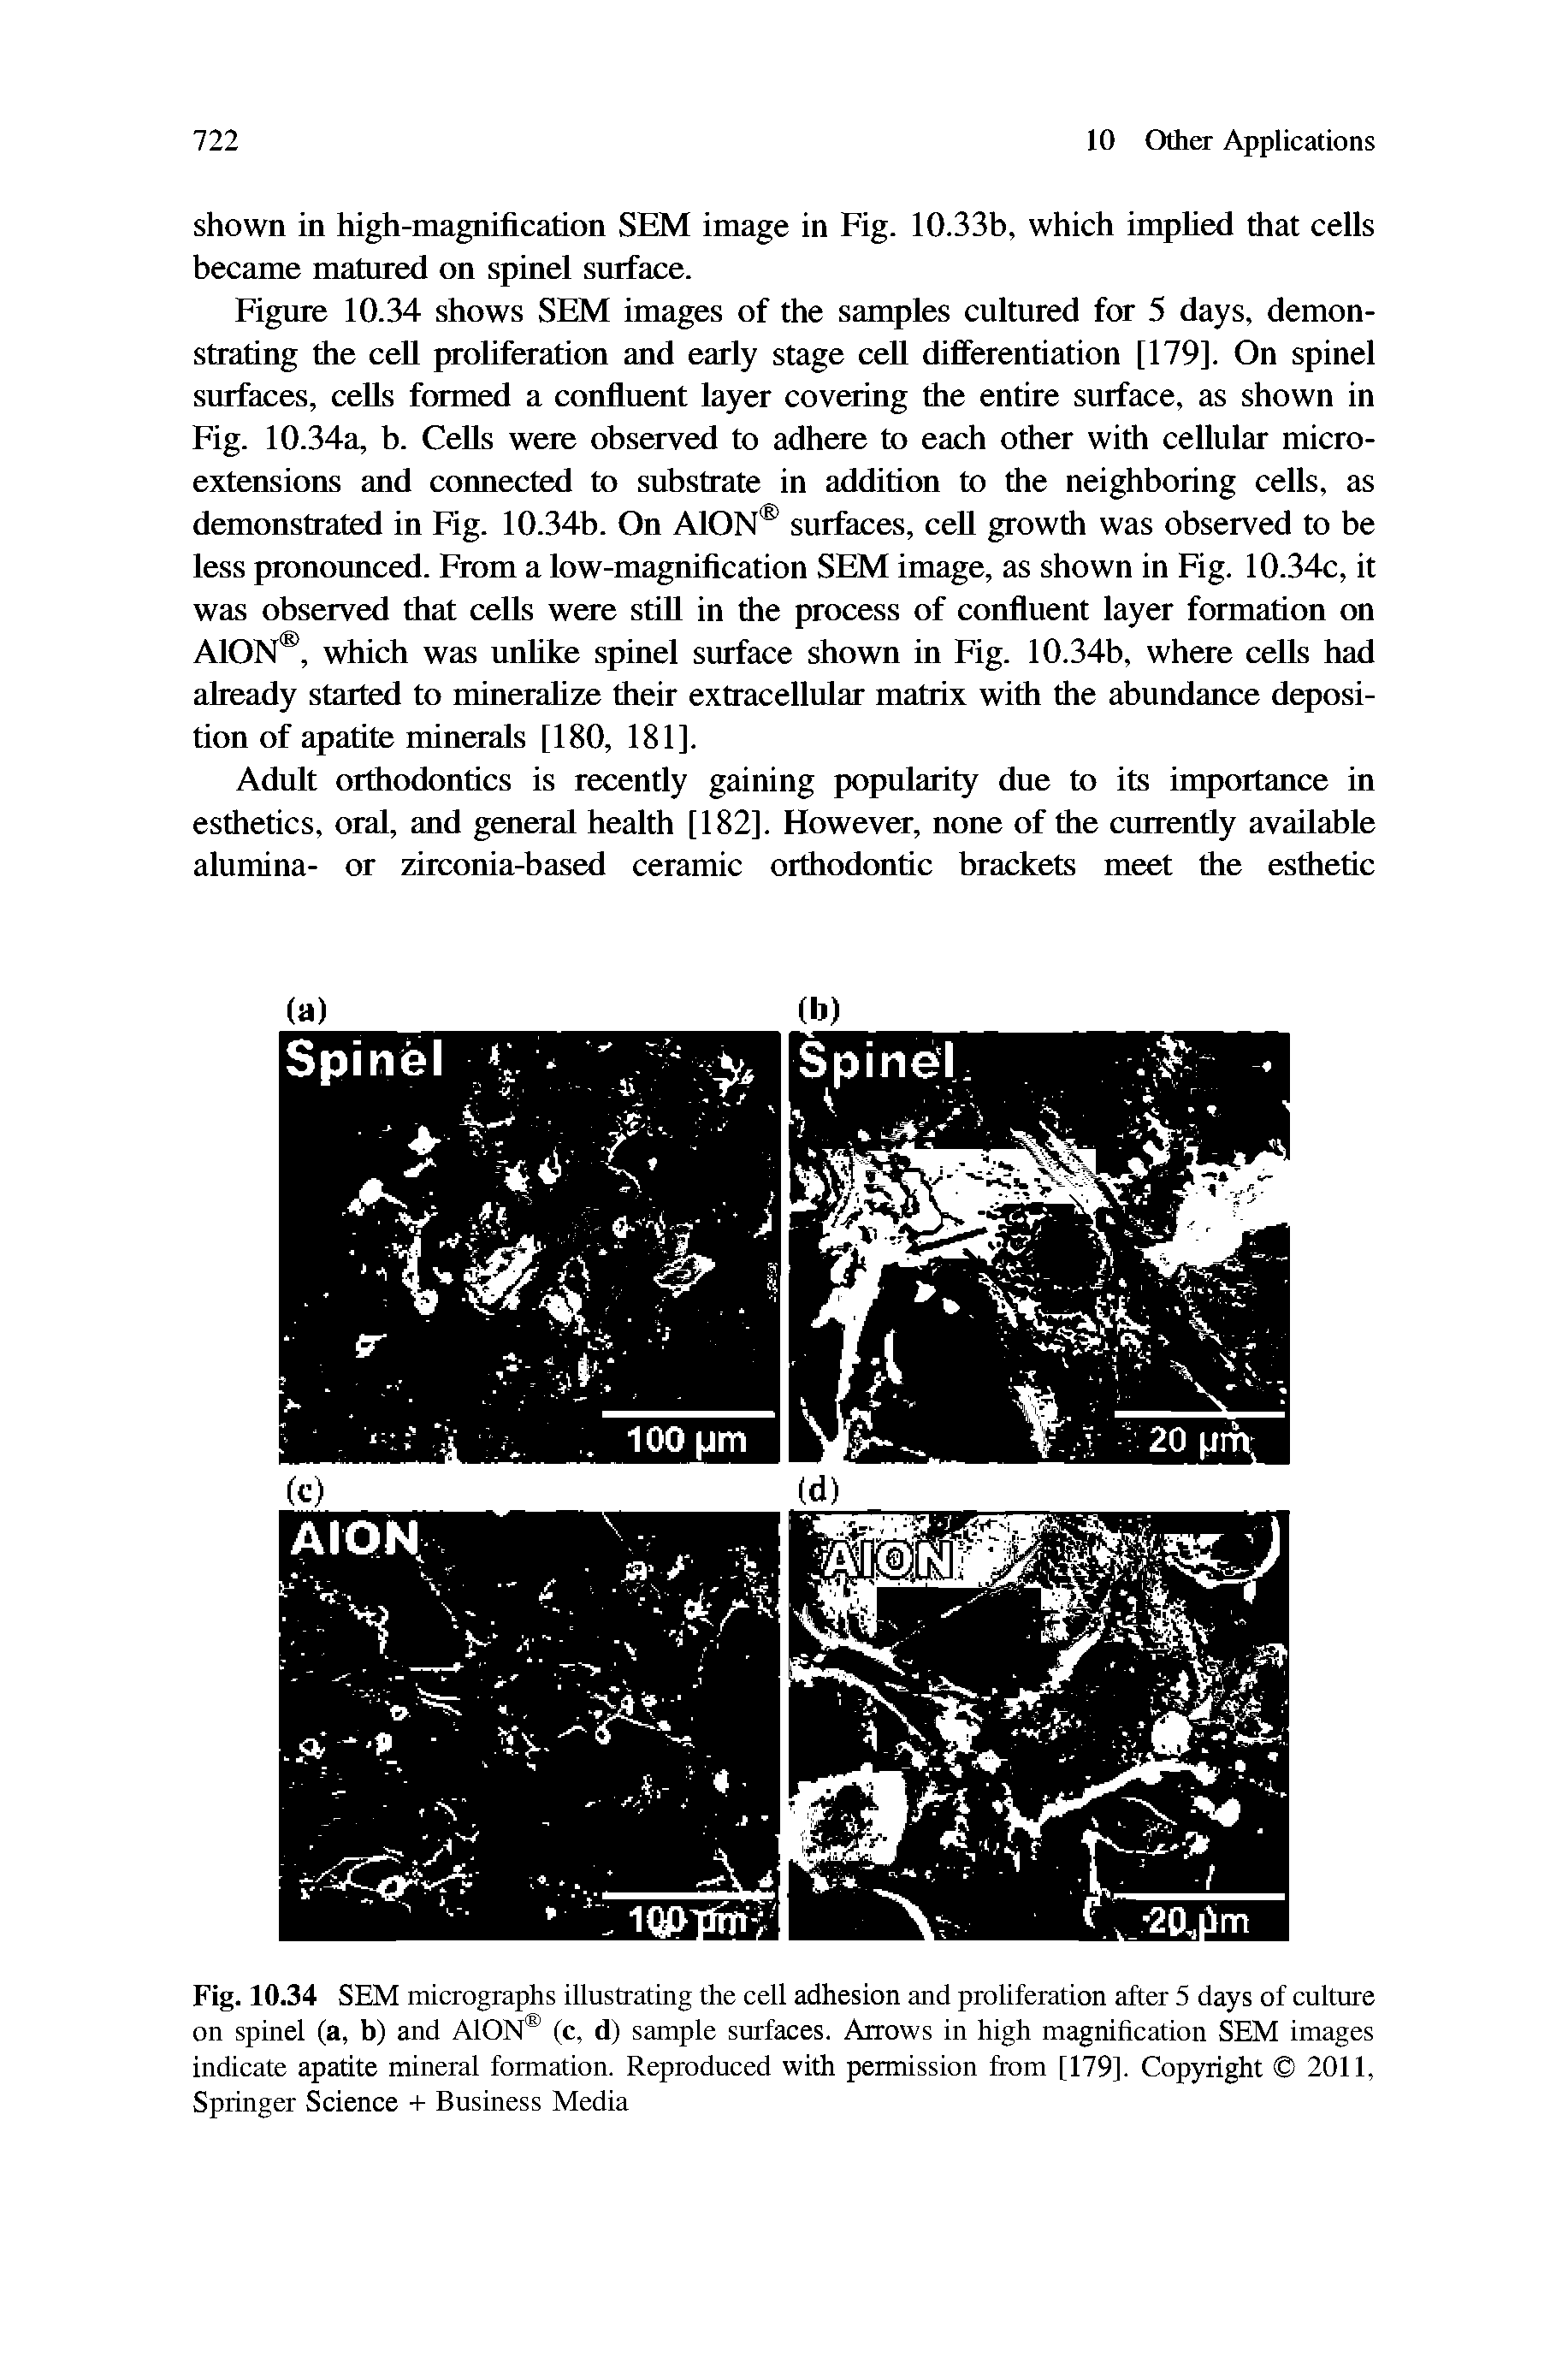 Figure 10.34 shows SEM images of the samples cultured for 5 days, demonstrating the cell proliferation and early stage cell differentiation [179]. On spinel surfaces, cells formed a confluent layer covering the entire surface, as shown in Fig. 10.34a, b. Cells were observed to adhere to each other with cellular microextensions and connected to substrate in addition to the neighboring cells, as demonstrated in Fig. 10.34b. On AlON surfaces, cell growth was observed to be less pronounced. From a low-magnification SEM image, as shown in Fig. 10.34c, it was observed that cells were stiU in the process of confluent layer formation on AlON , which was unlike spinel surface shown in Fig. 10.34b, where cells had already started to mineralize their extracellular matrix with the abundance deposition of apatite minerals [180, 181].